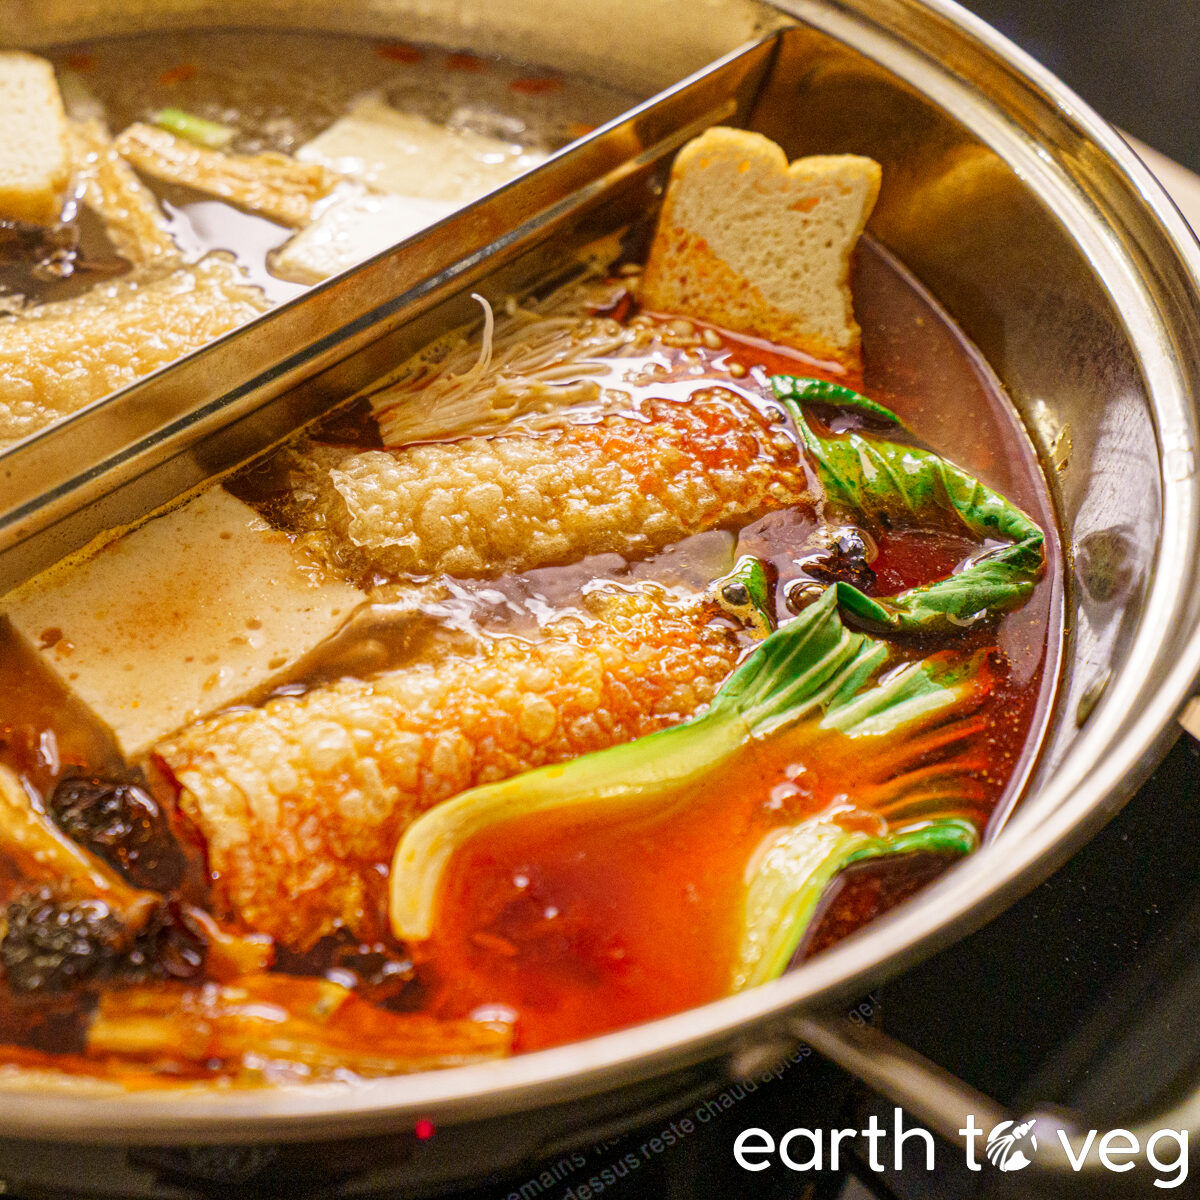 simmering spicy red chinese hot pot broth filled with tofu, bok choy, soy rolls, fried bean curd, and wood ear mushrooms